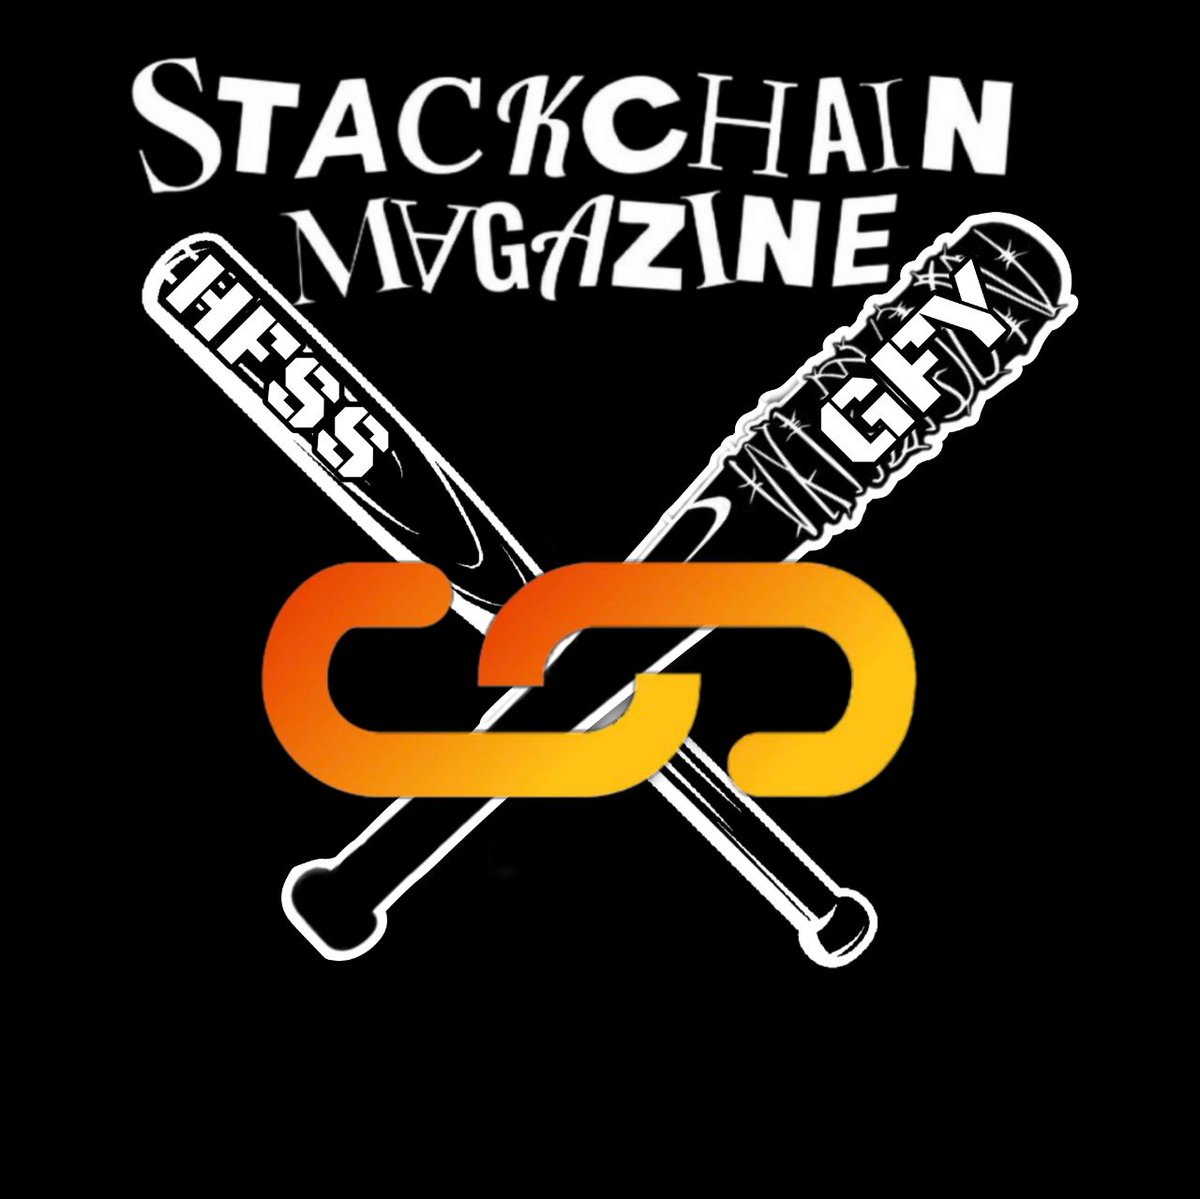 @BTCsessions @Stackchainmag 🧡